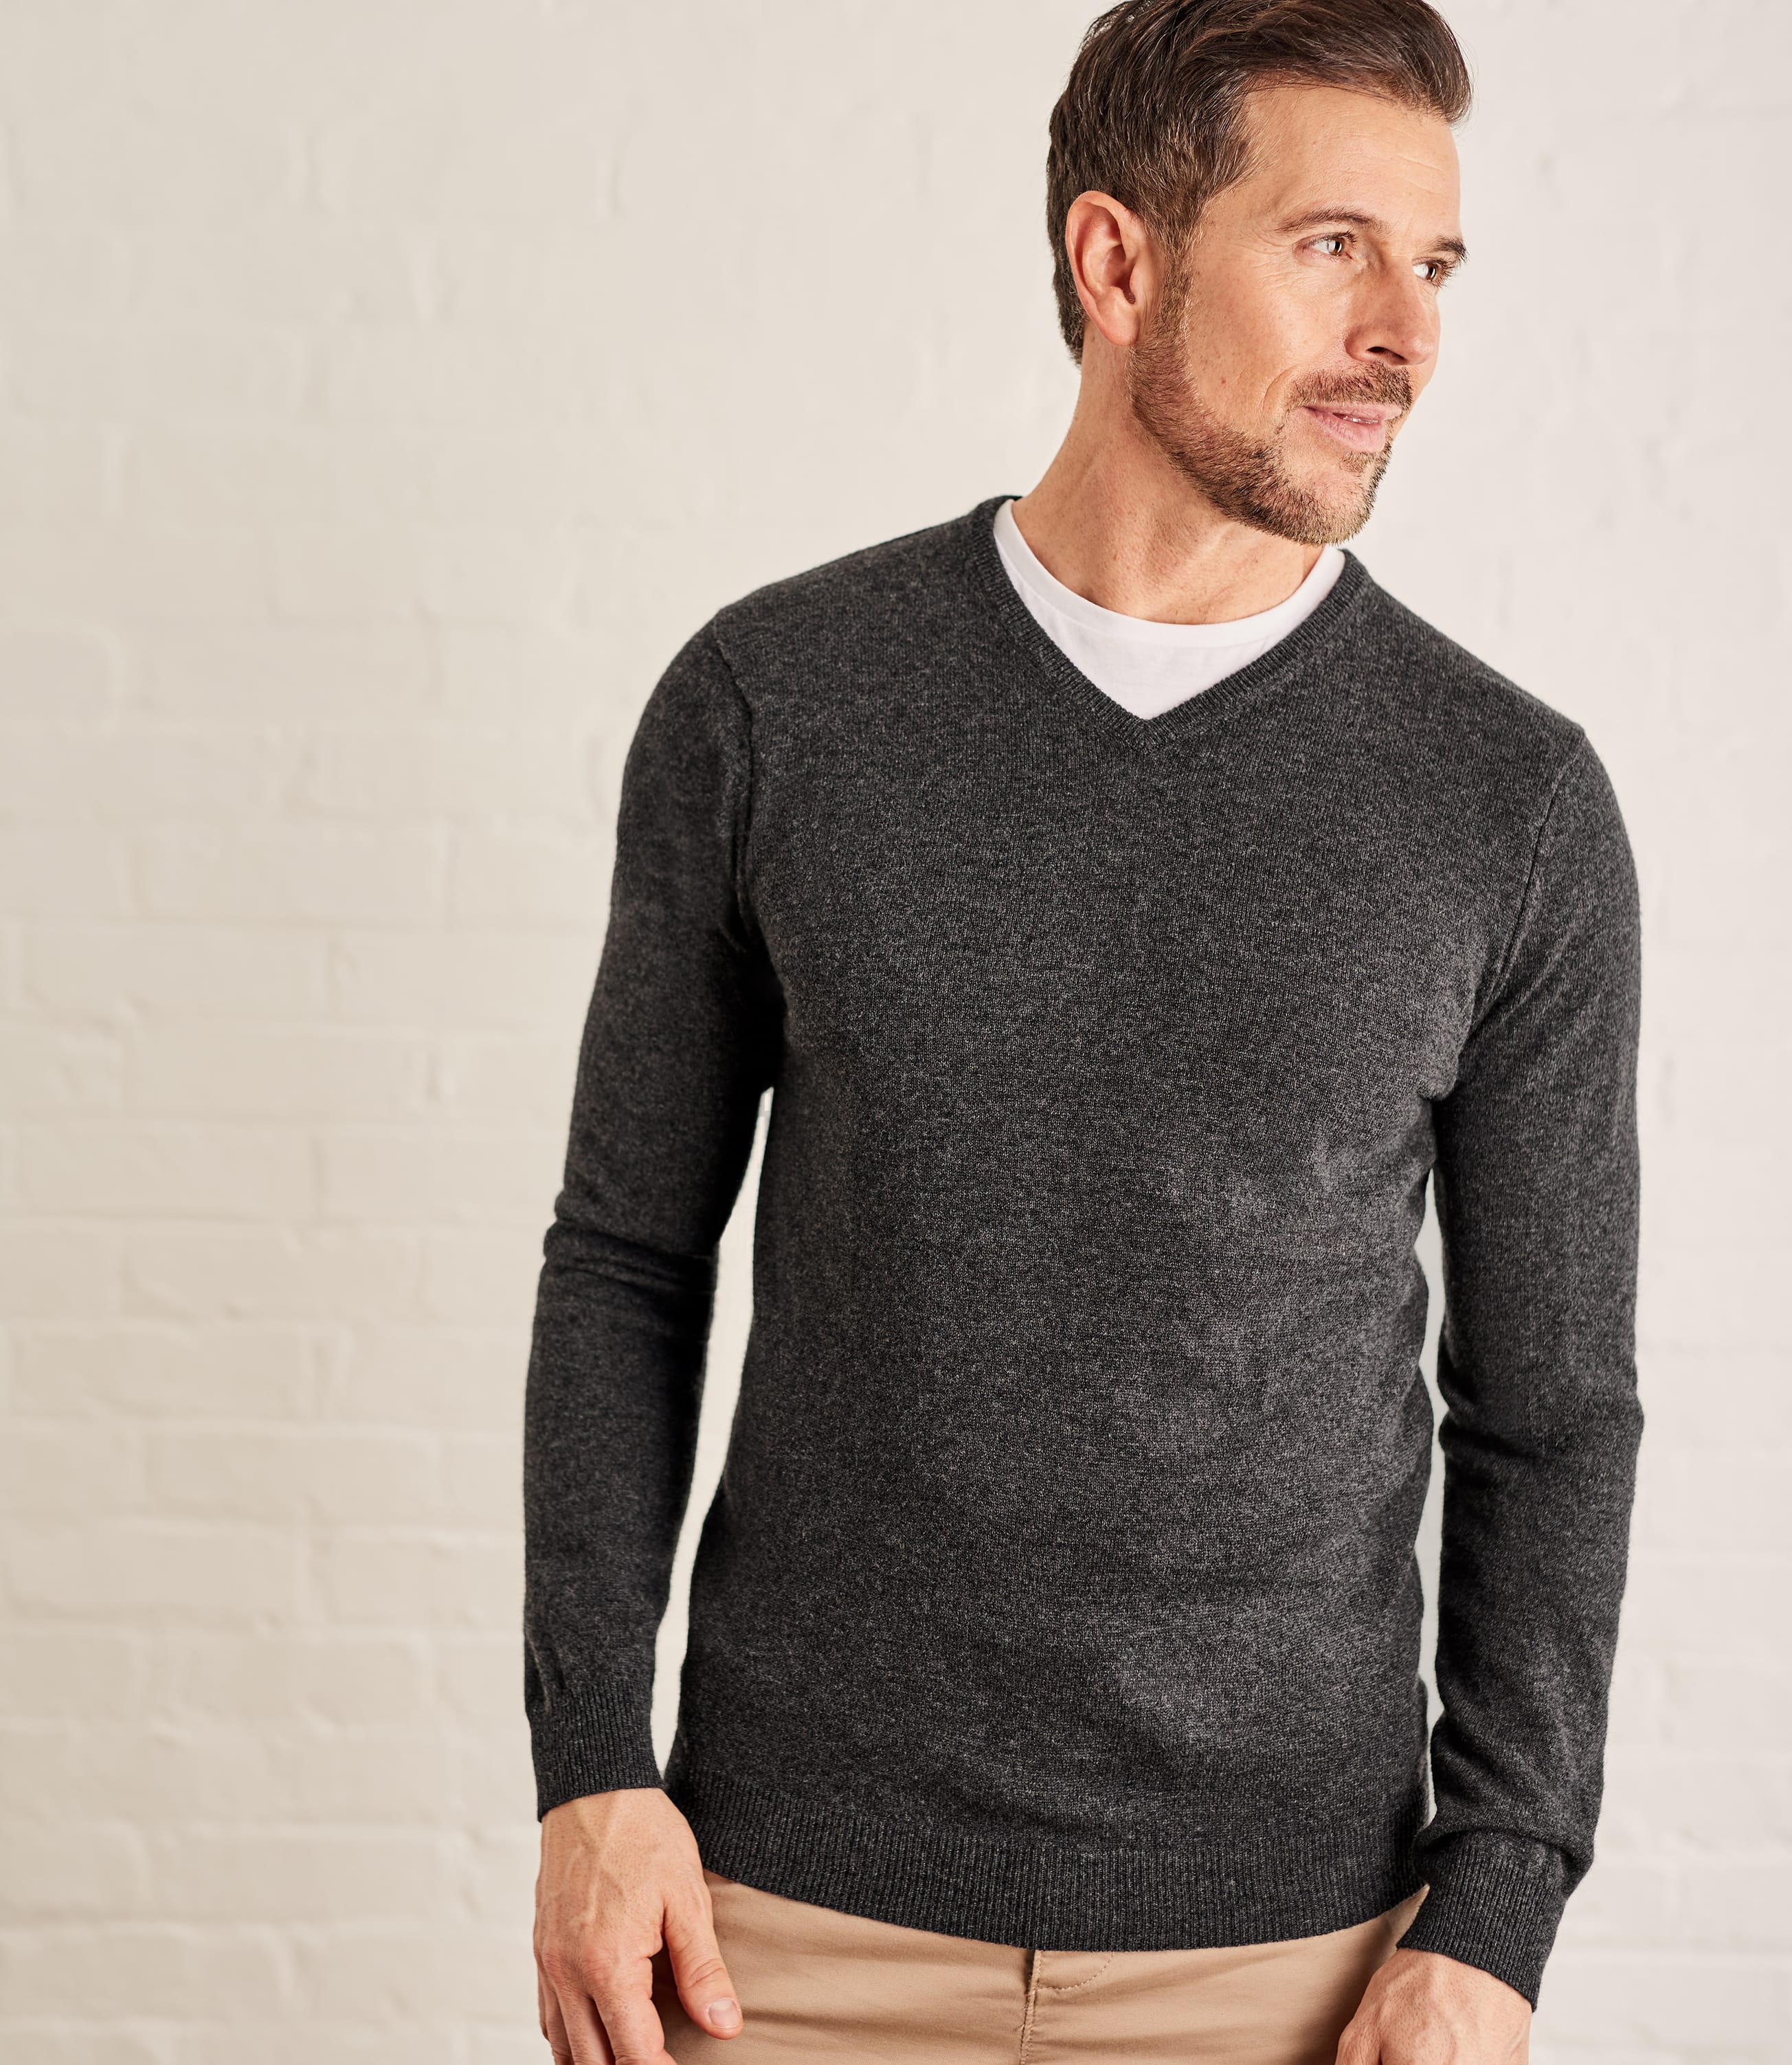 Men's Cashmere & Merino Jumpers | WoolOvers